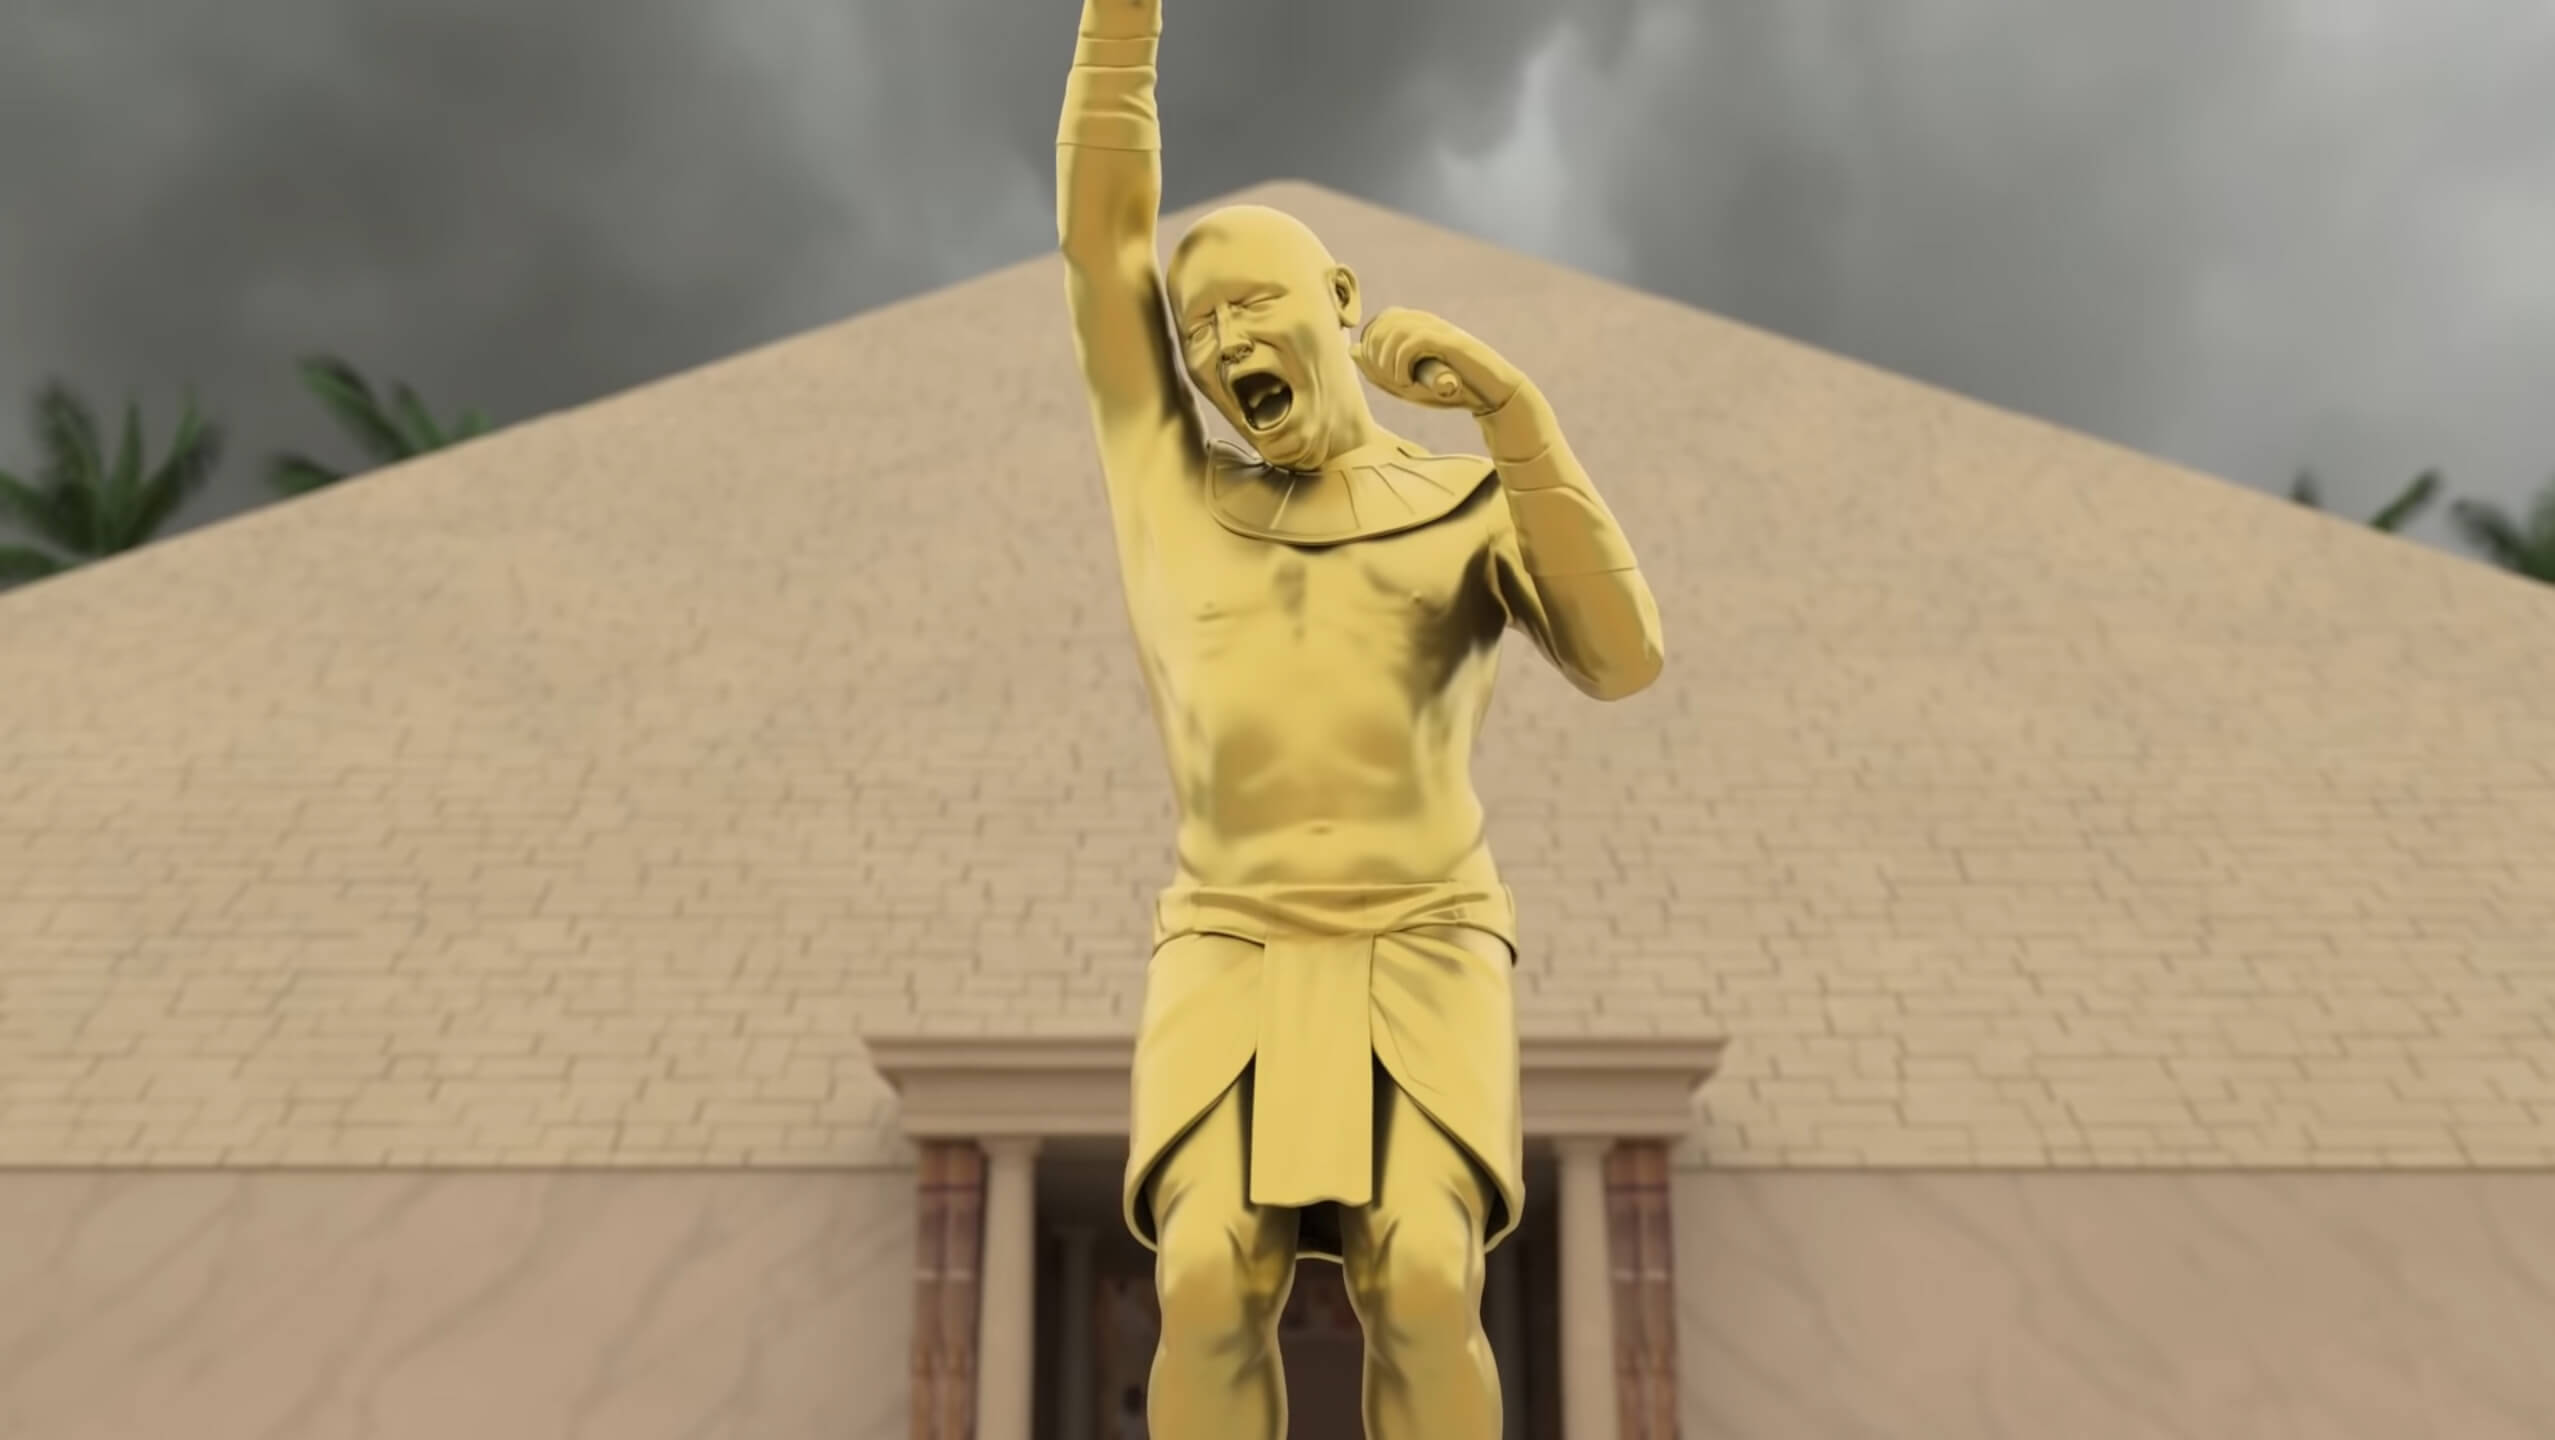 Rendering of a pyramid with a giant gold baby statue outside